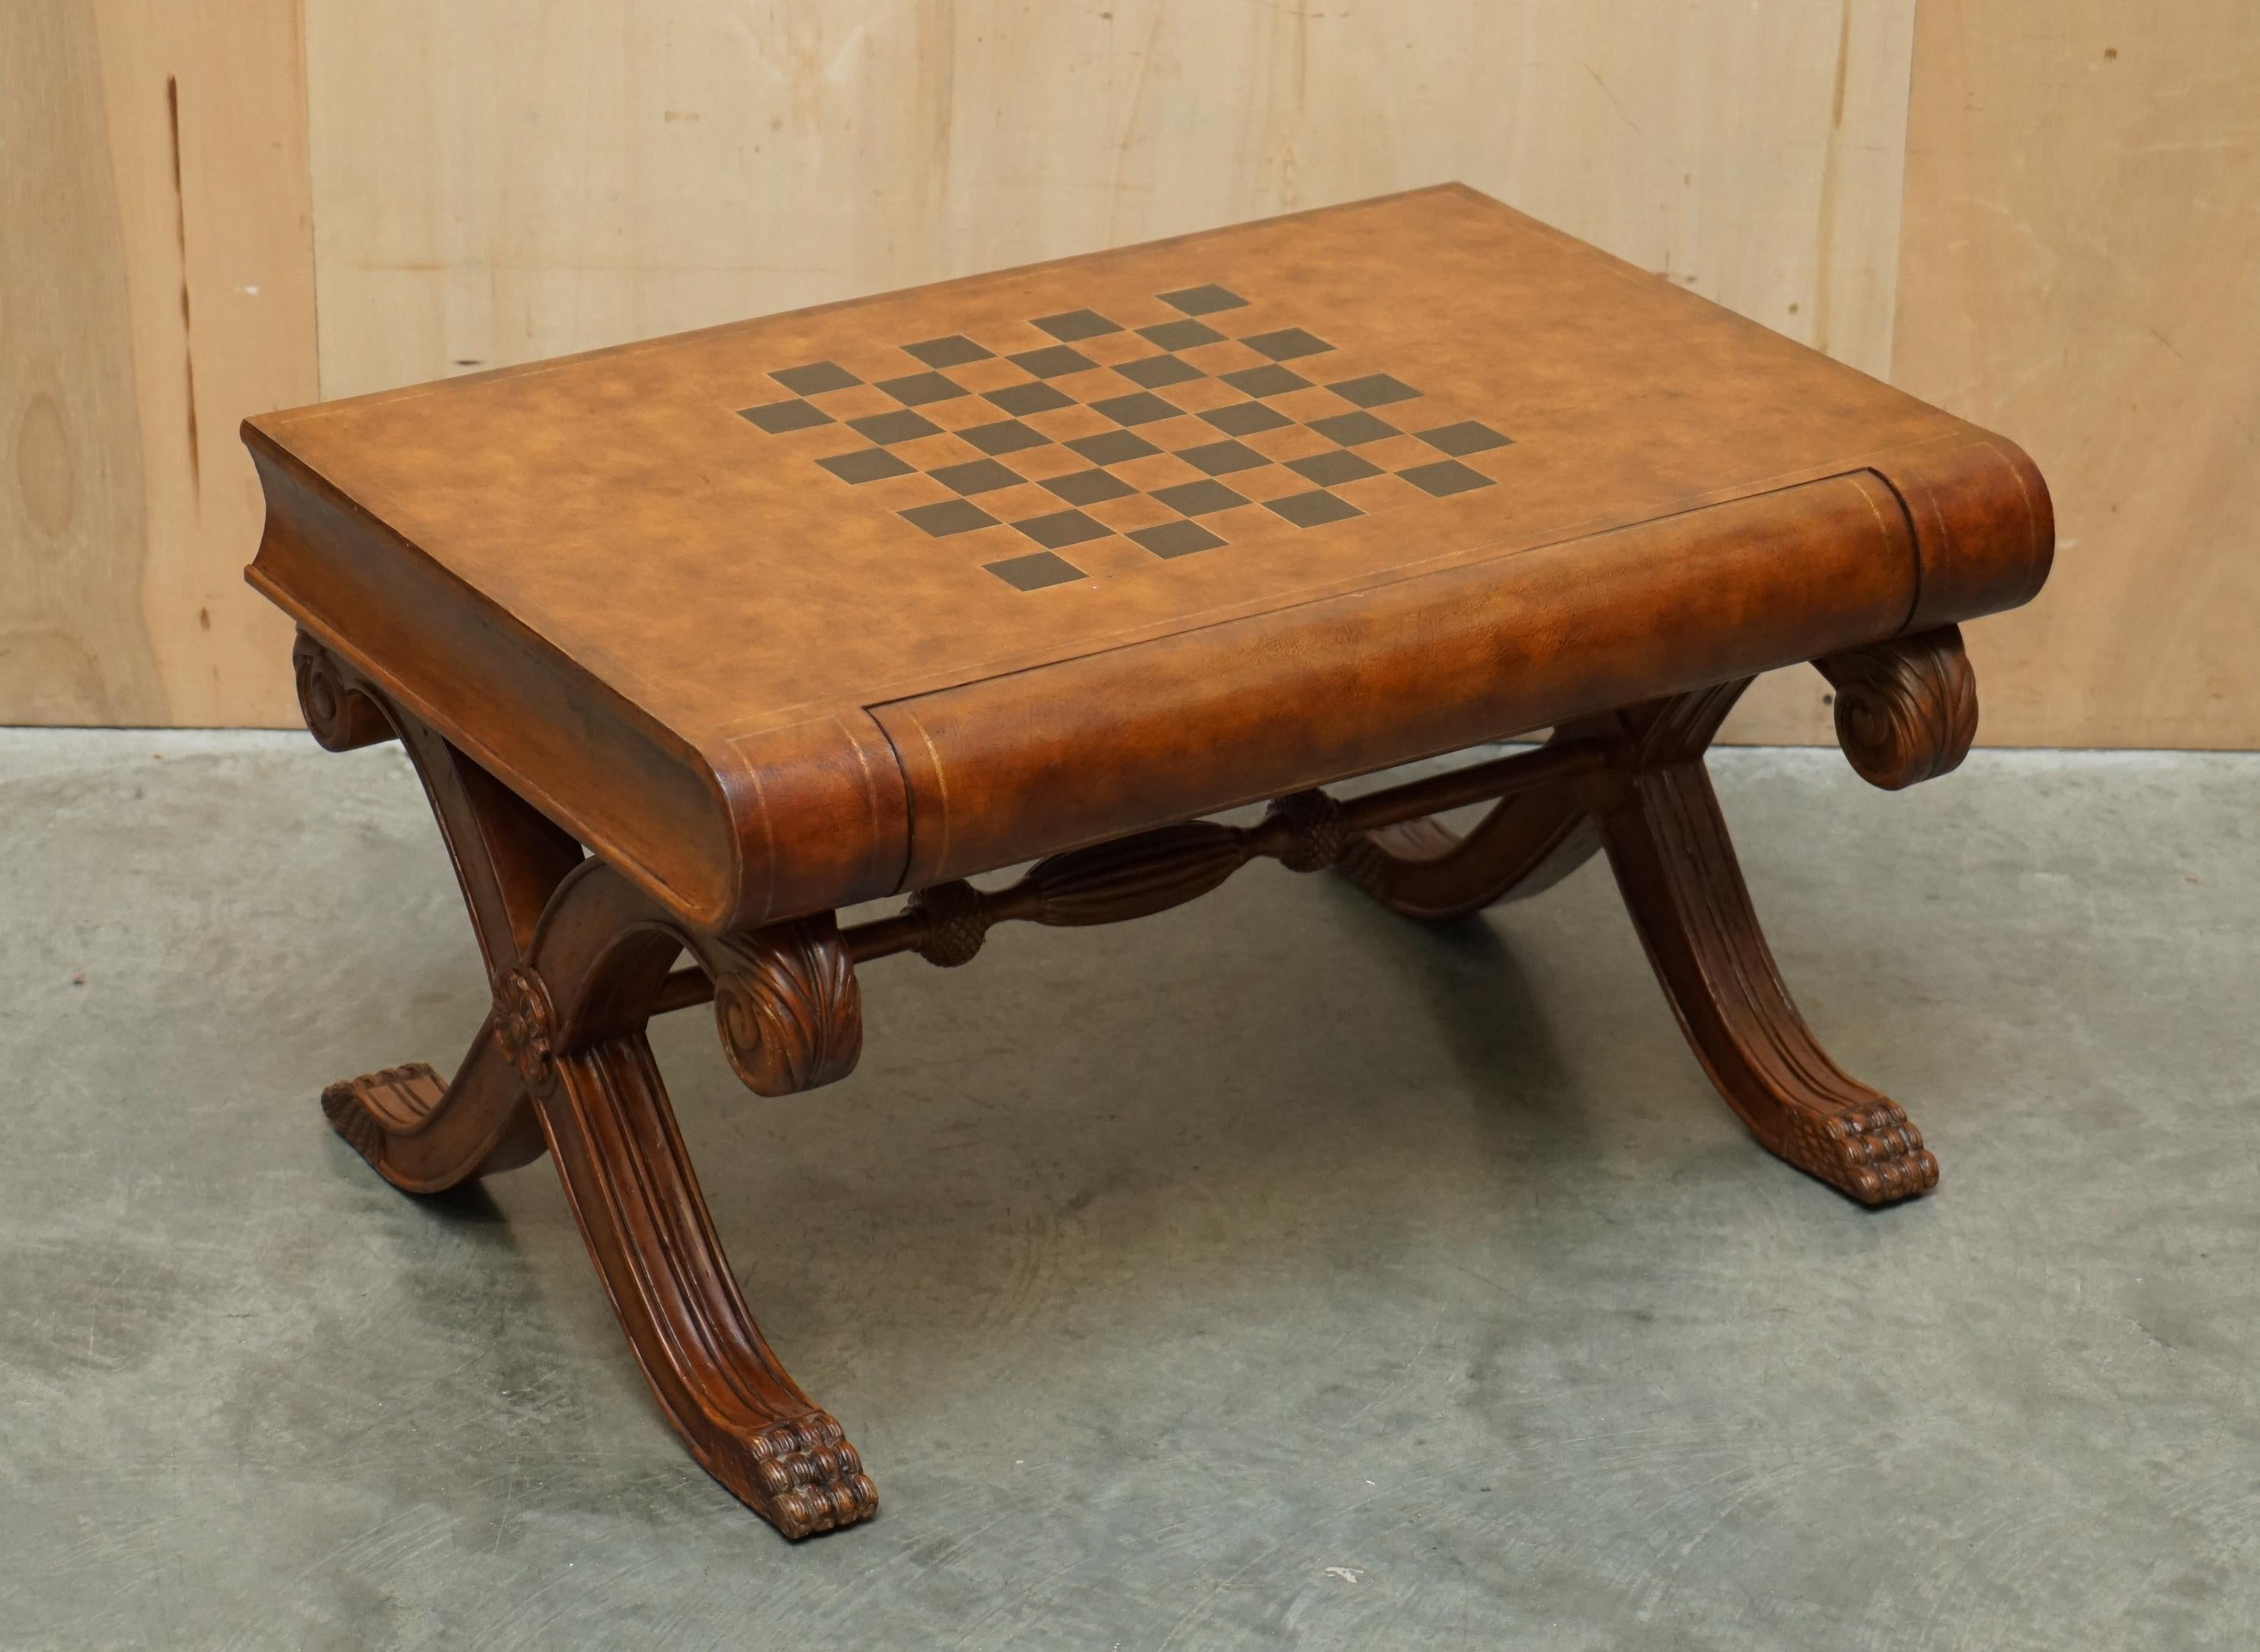 Royal House Antiques

Royal House Antiques is delighted to offer for sale this absolutely stunning, scholars book top, hand dyed brown leather Chessboard coffee table with one large single drawer

Please note the delivery fee listed is just a guide,